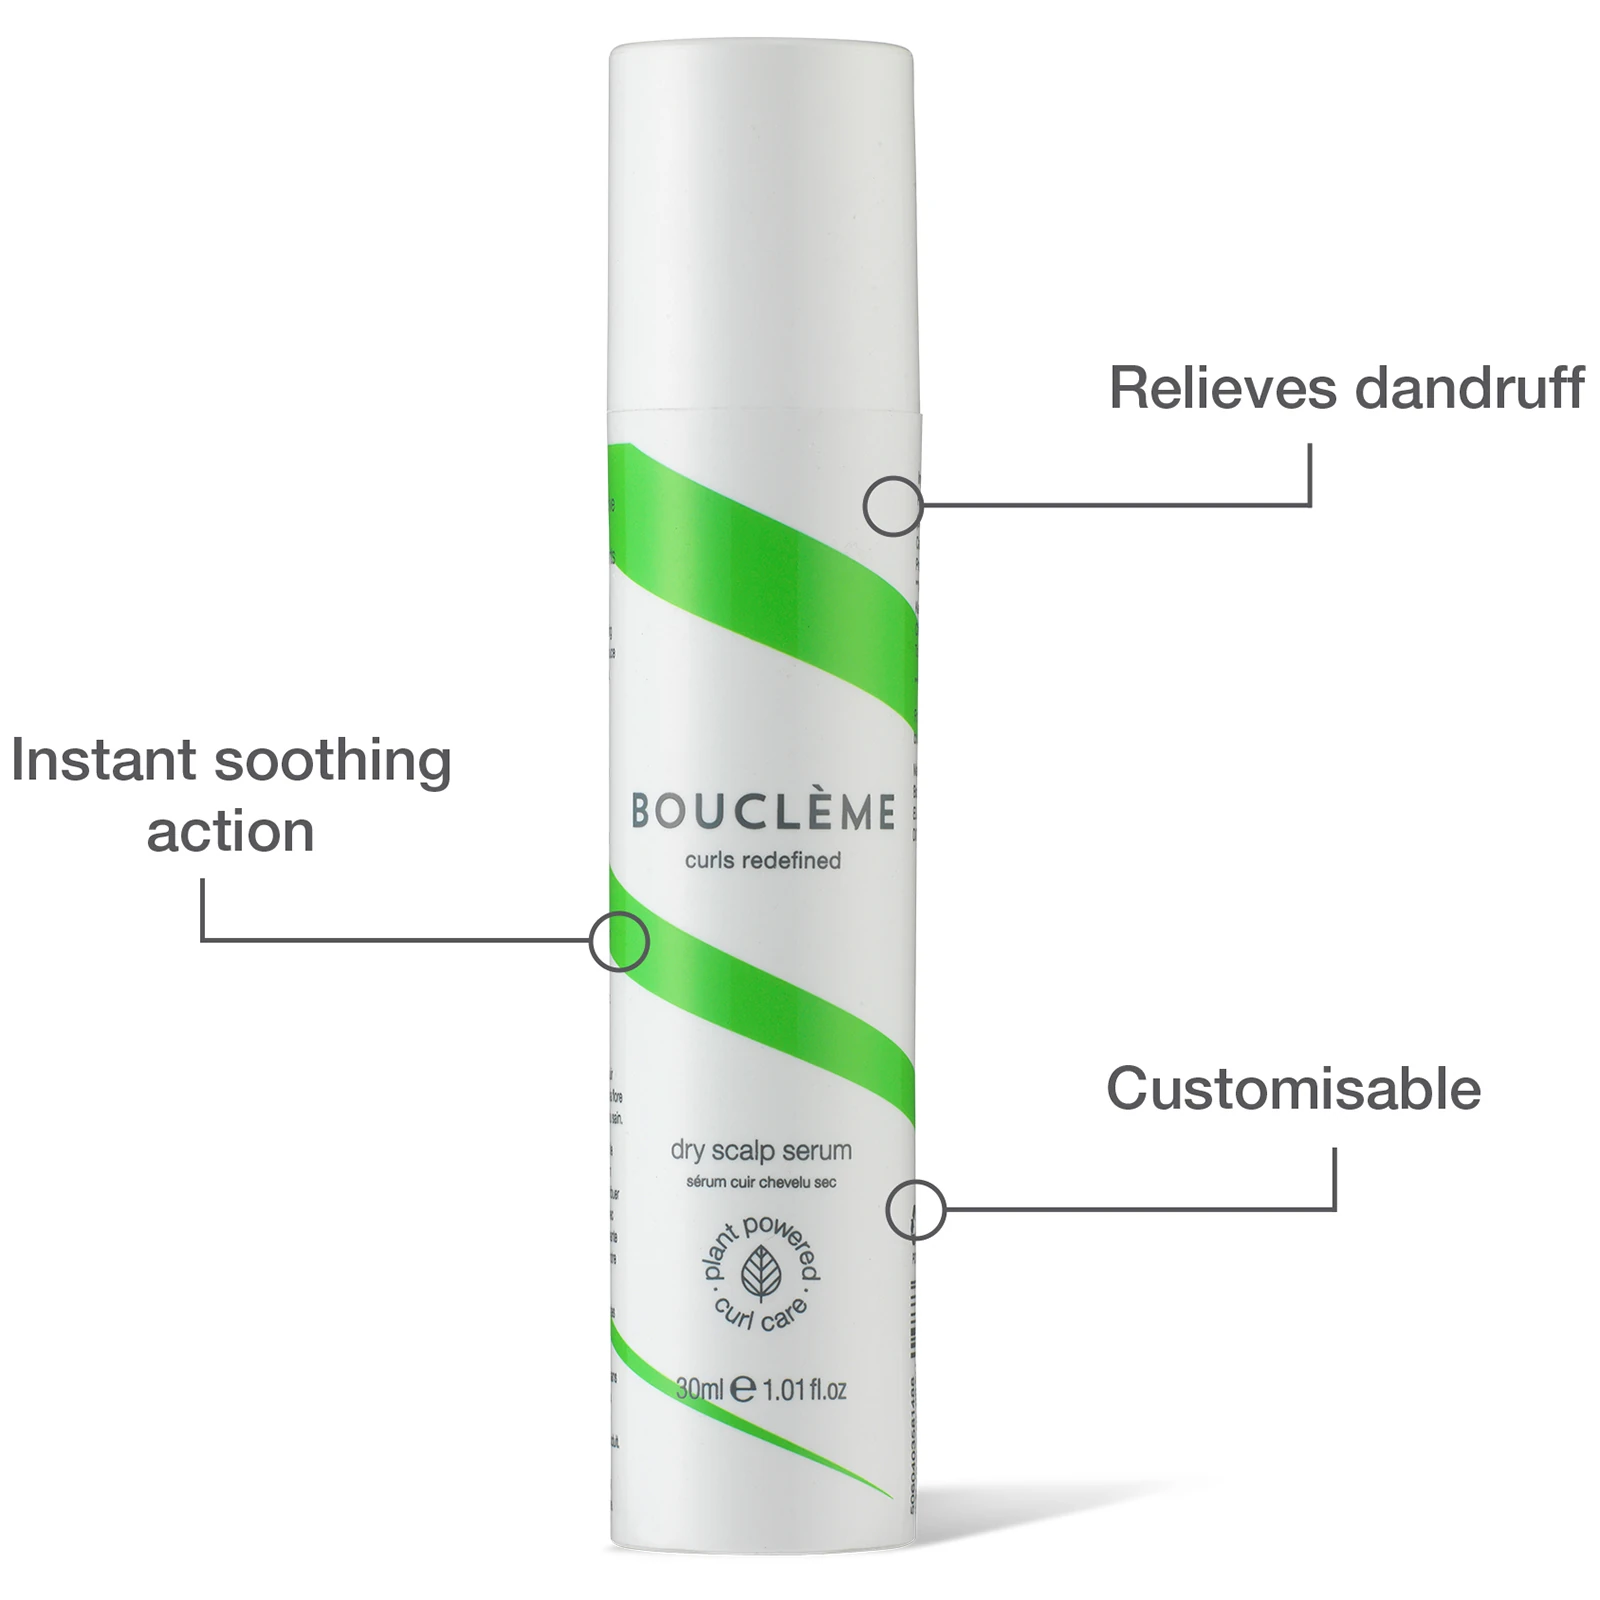 relieves dandruff, instant soothing action, customisable